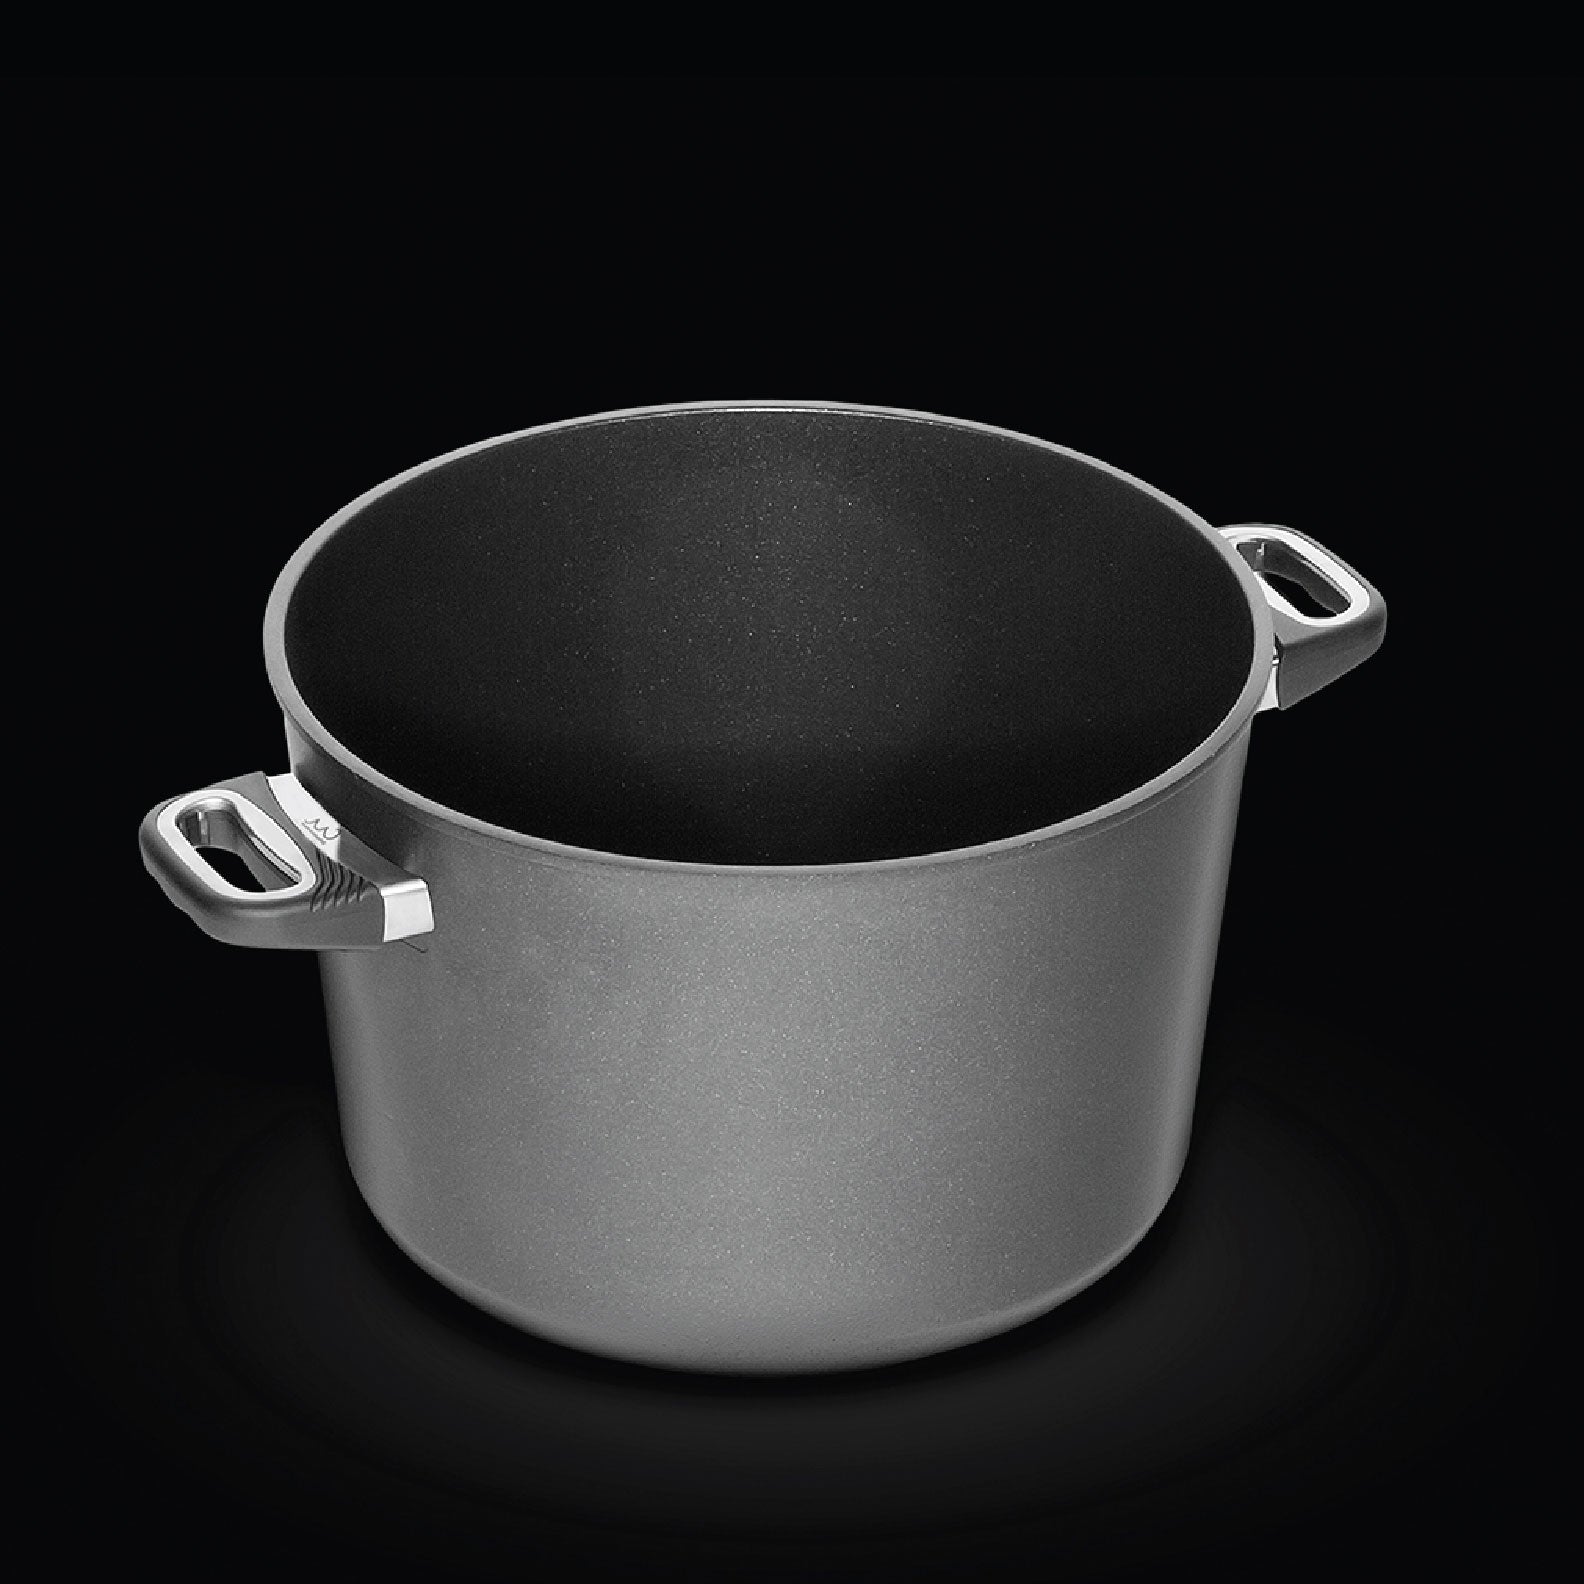 Pot Item with Side Handles